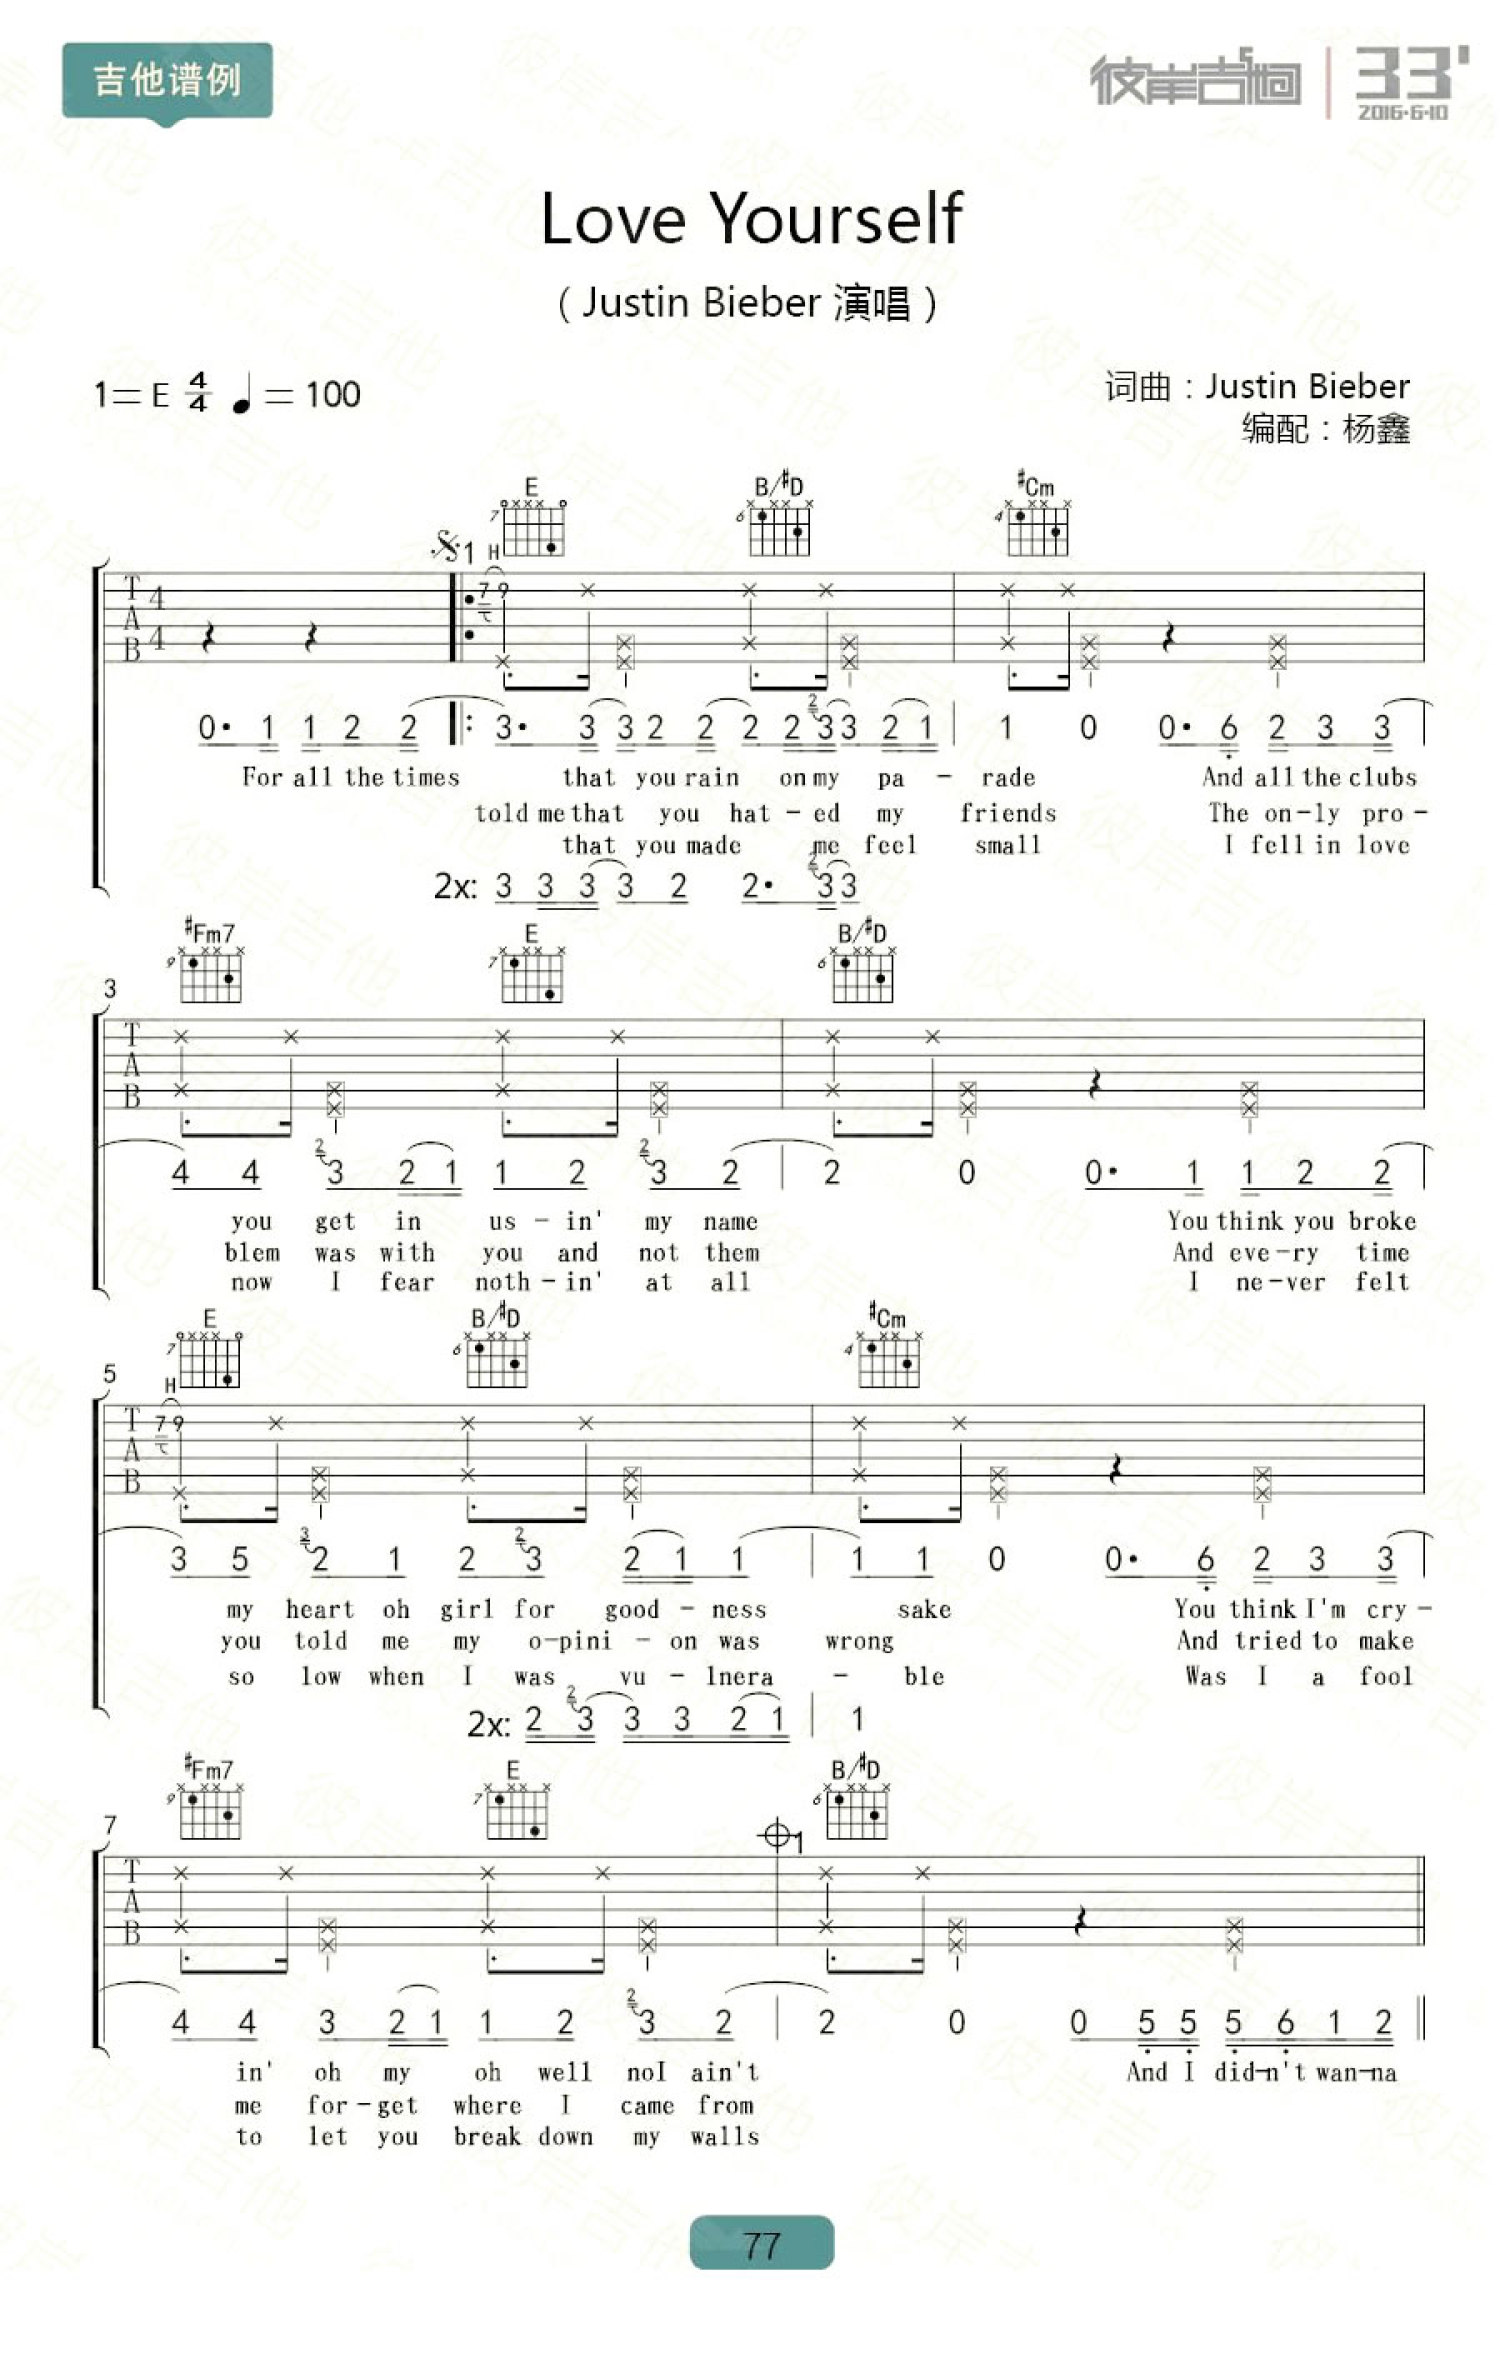 Perfect for guitar. Guitar sheet music and tabs.